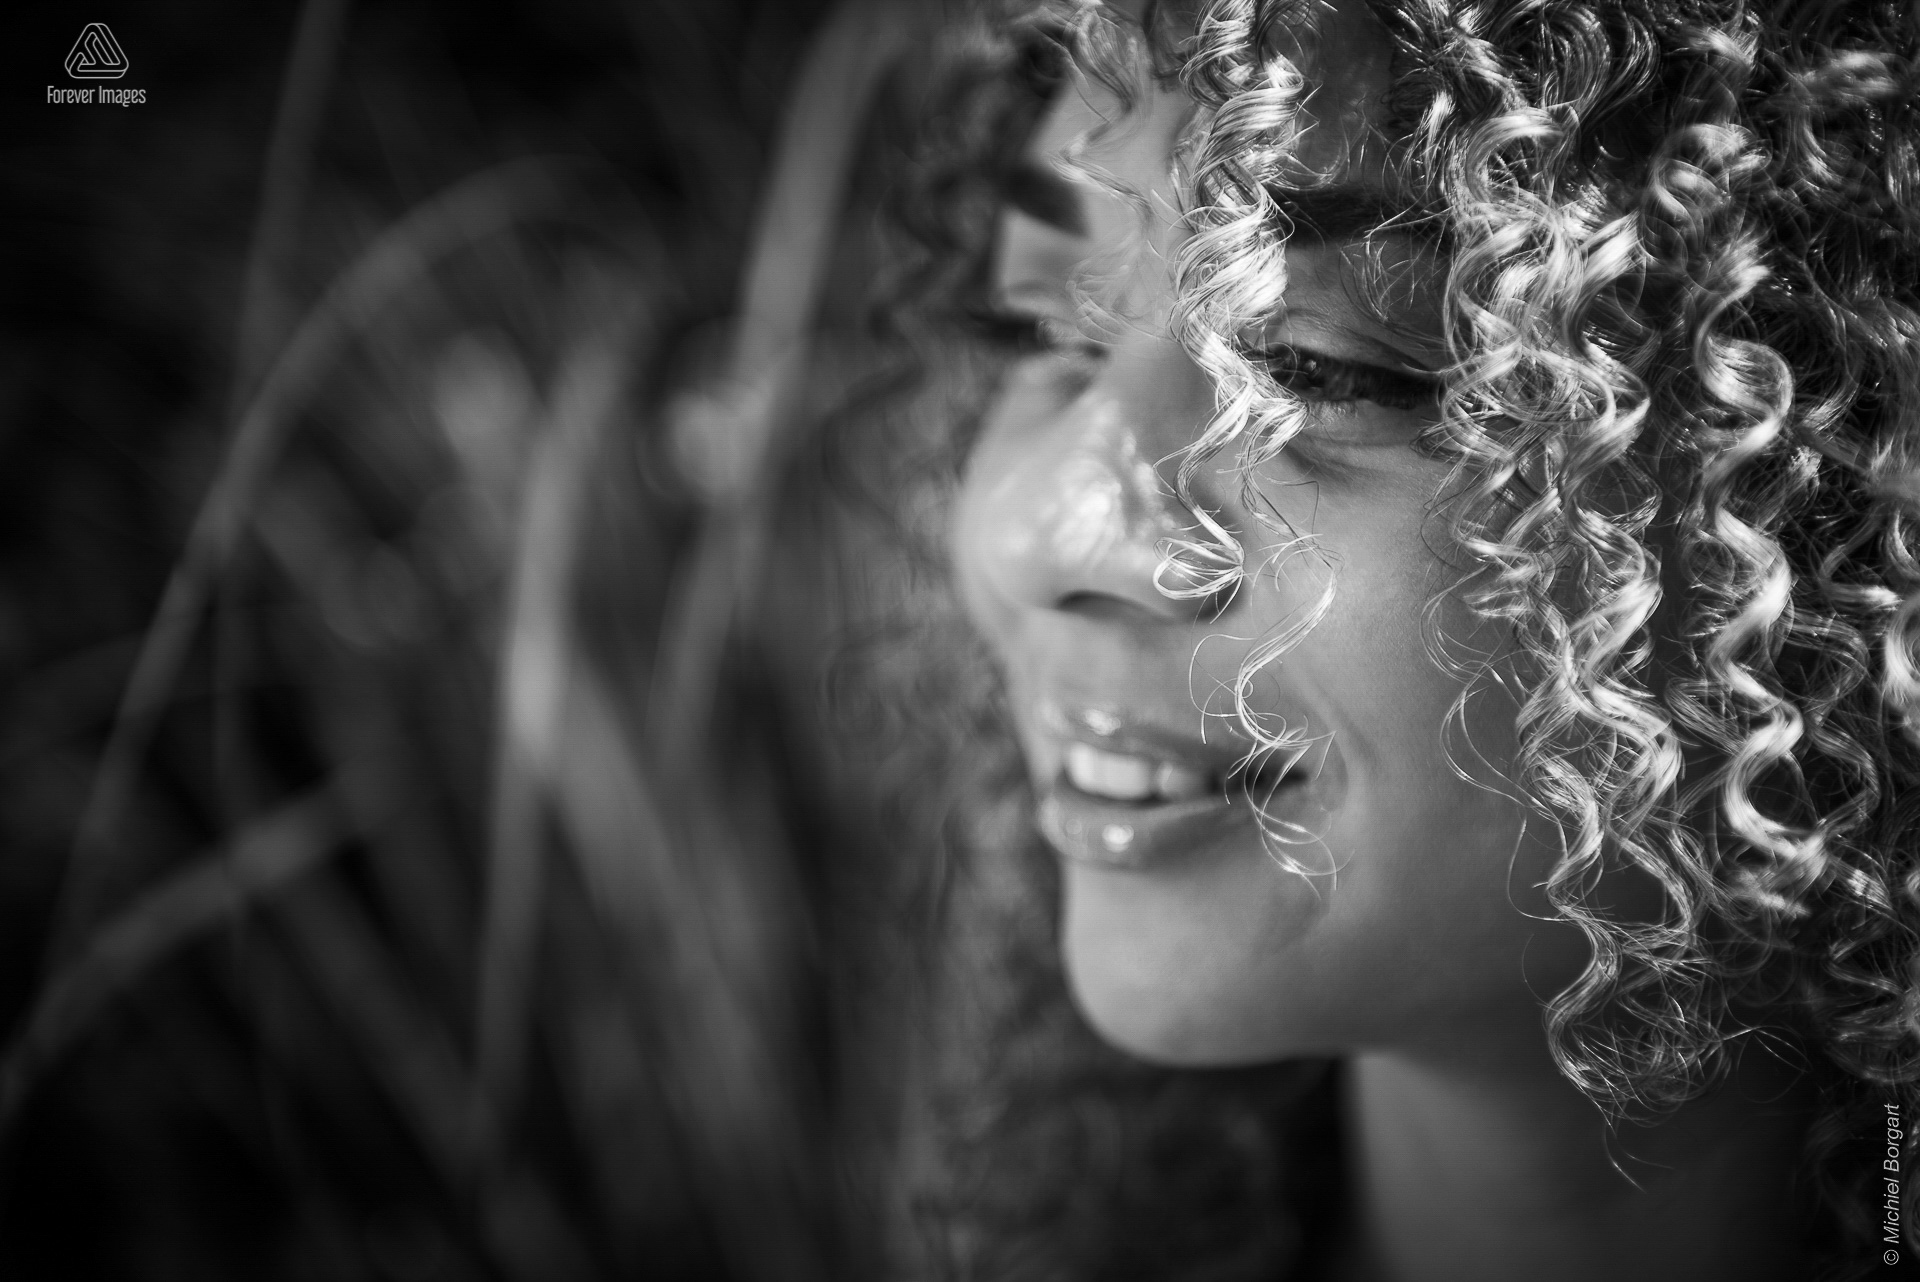 Portrait photo black and white B&W young lady with gorgeous curls and smile | Samantha Reyes Amsterdam | Portrait Photographer Michiel Borgart - Forever Images.